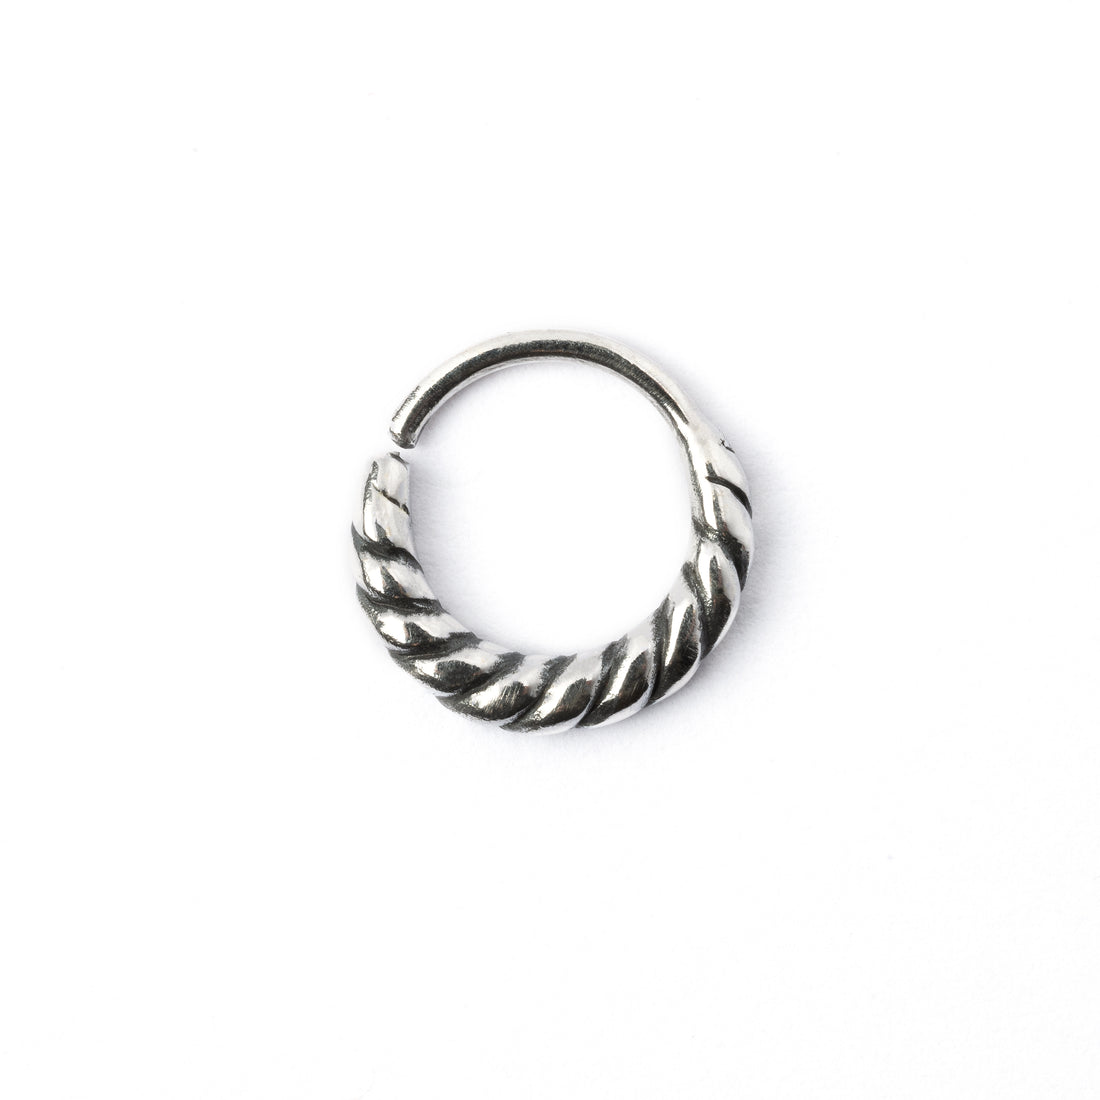 Twisted Silver septum piercing ring frontal view